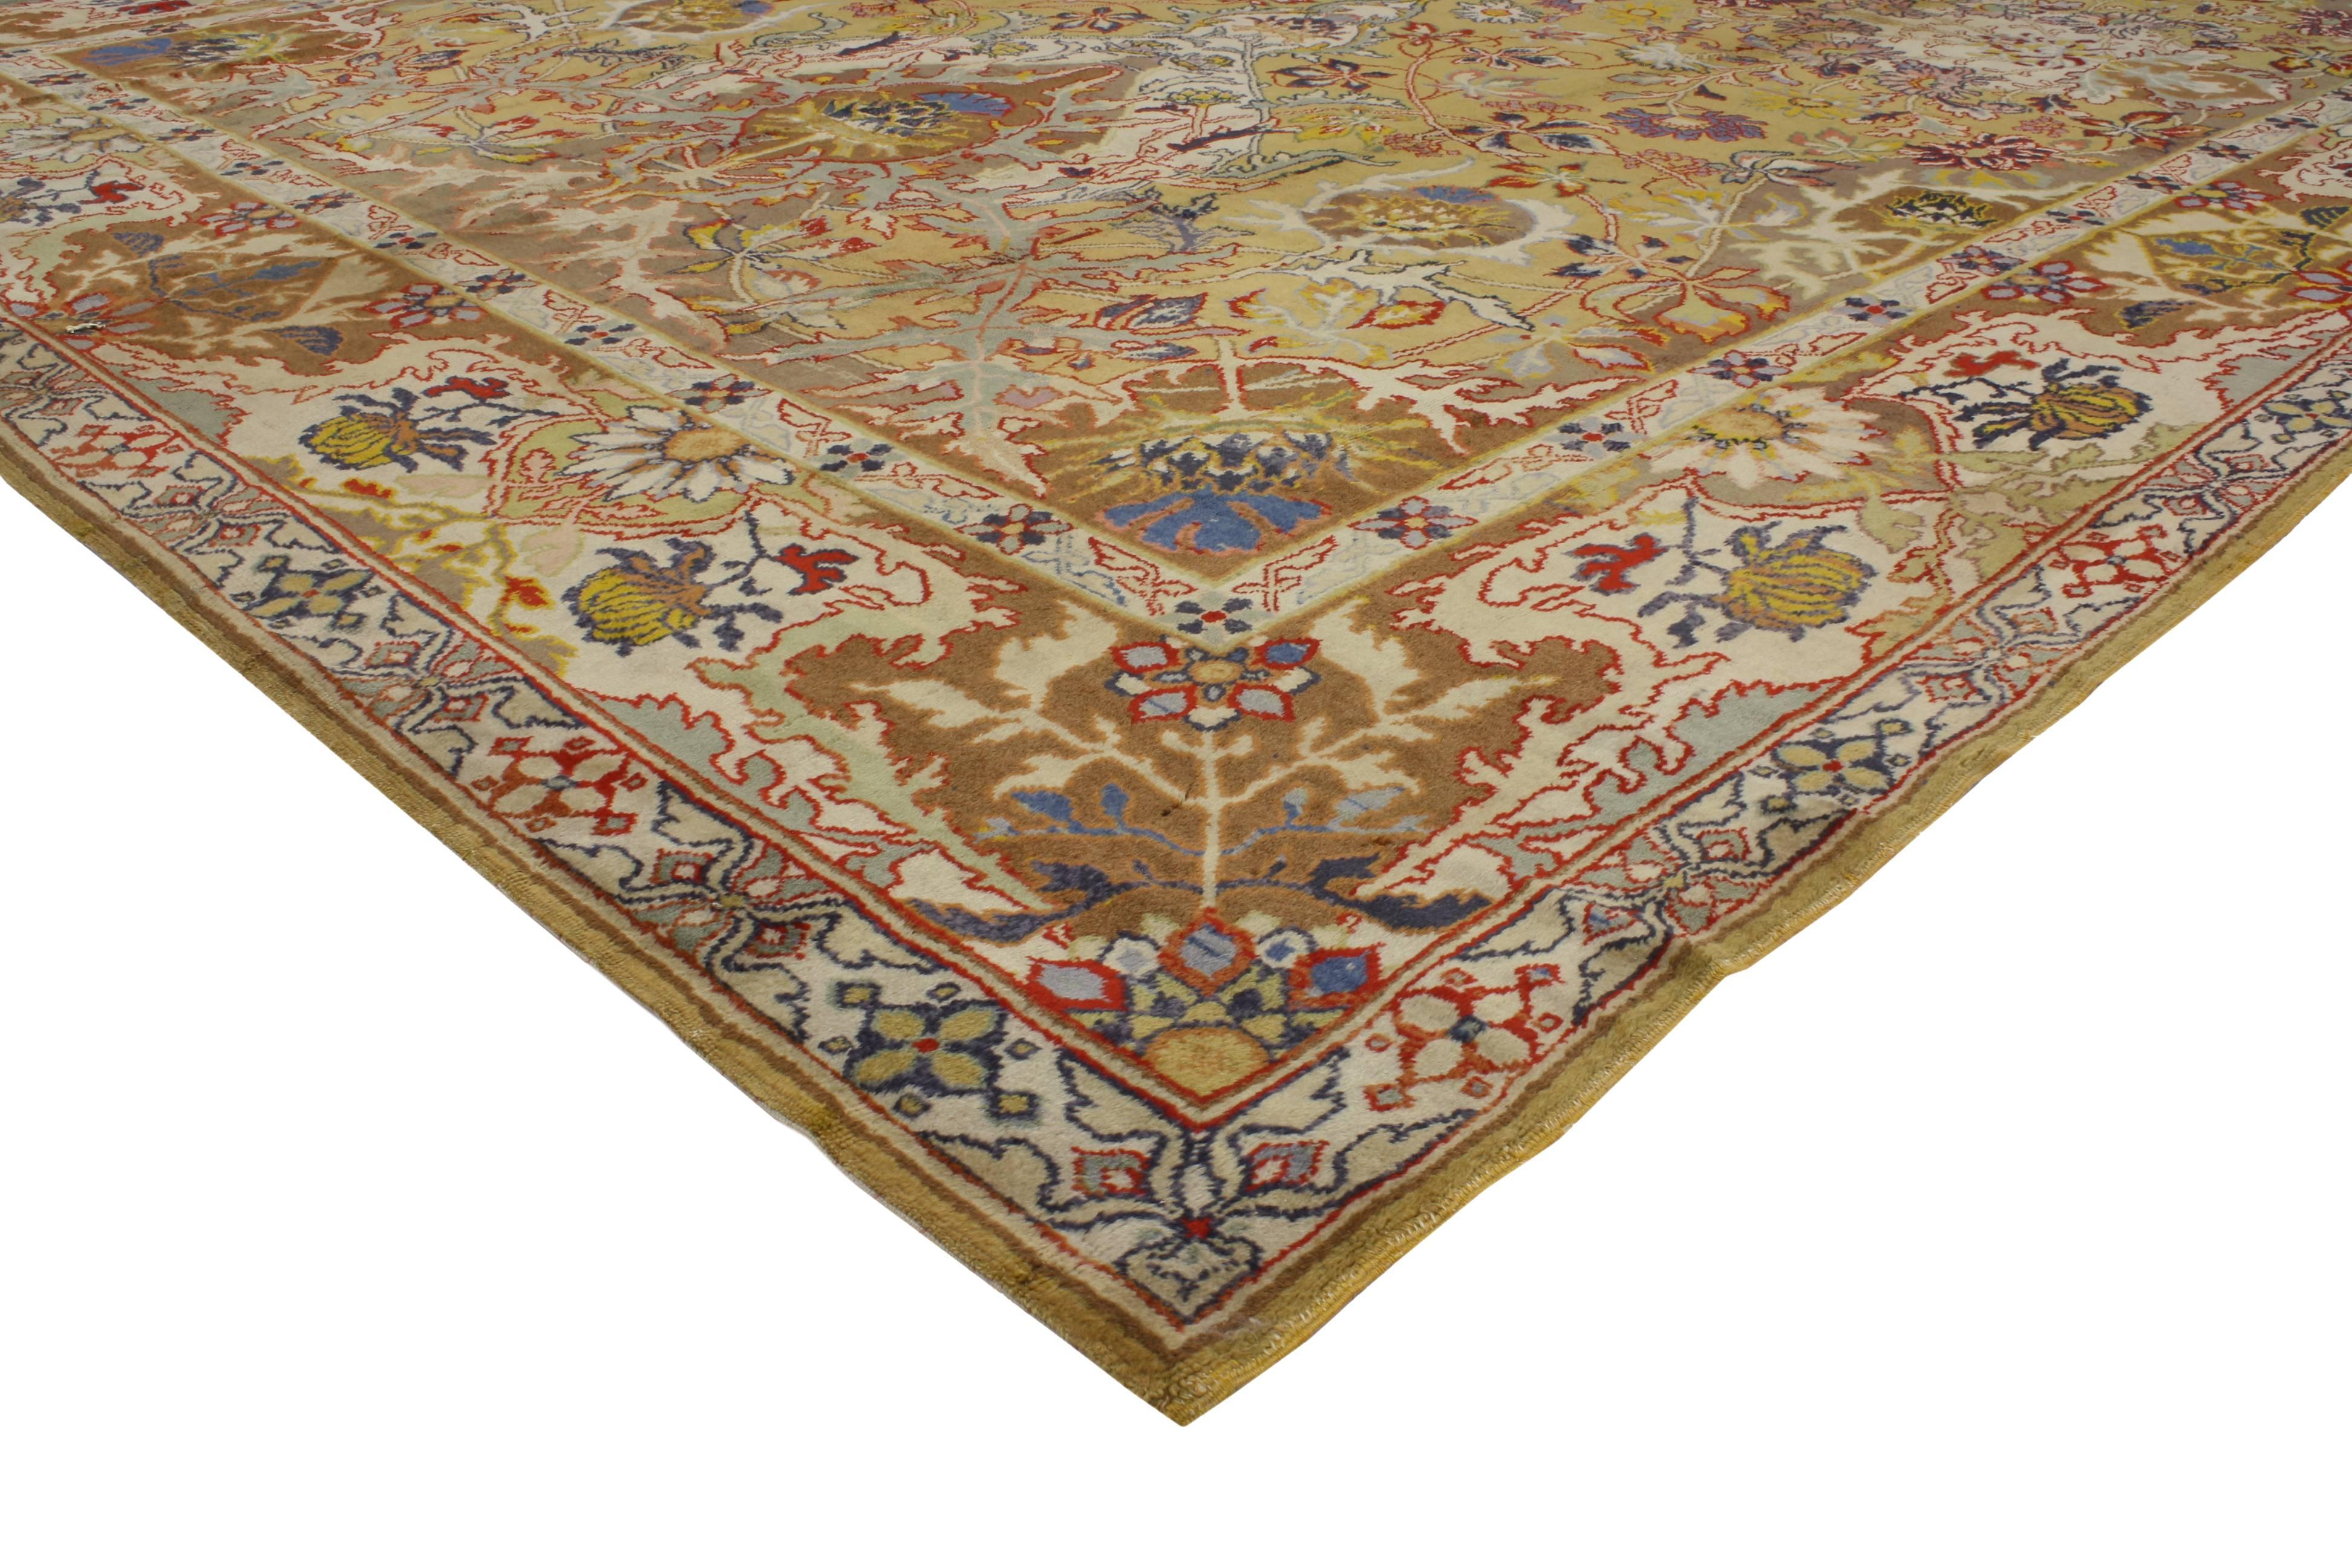 This antique European rug features an Oushak Design and traditional modern style. It is characterized by grand scale elements of design and a beautiful golden yellow field. Large geometric motifs create a majestic cadence throughout this